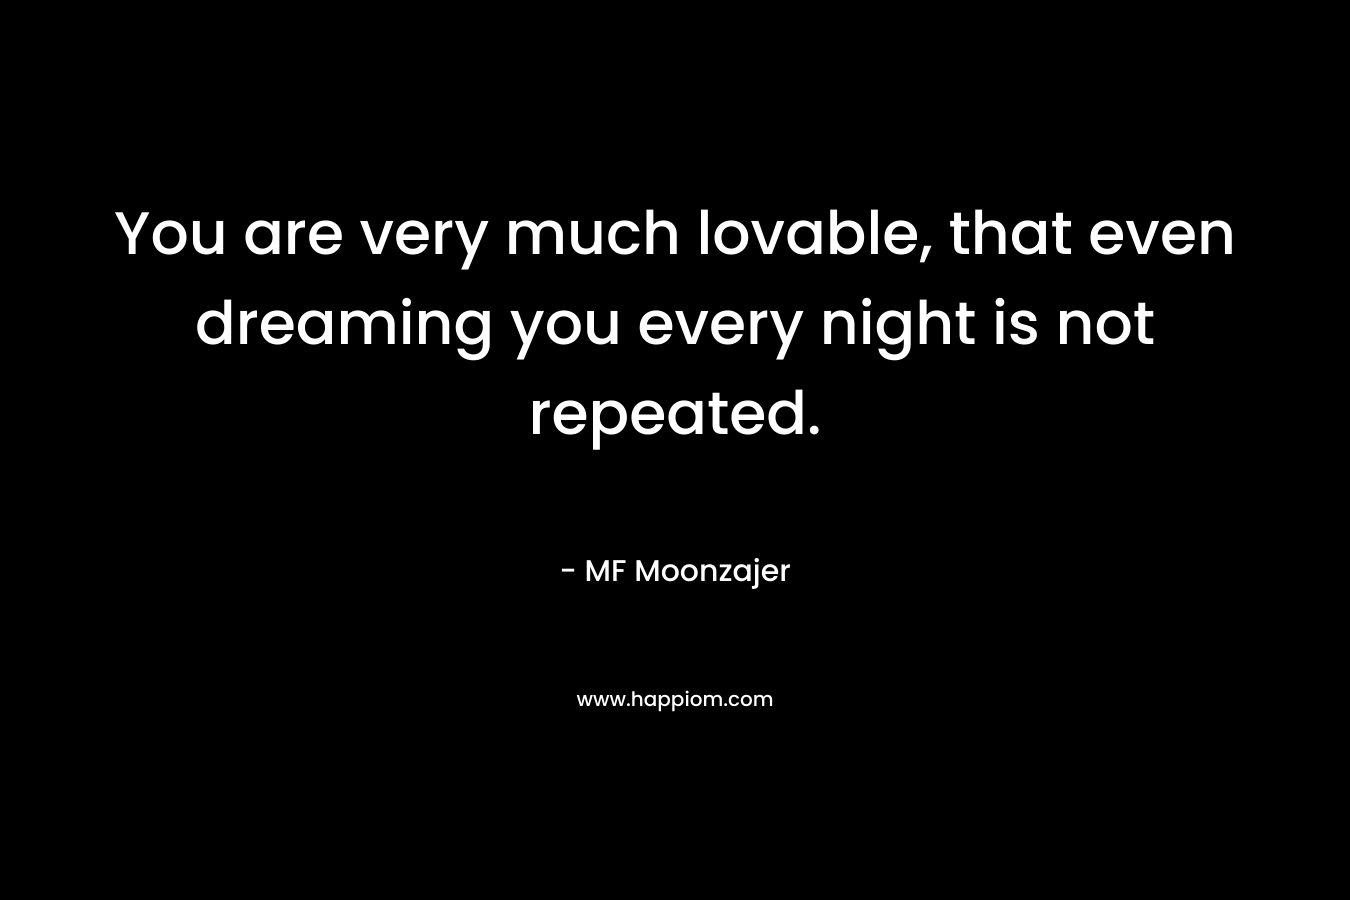 You are very much lovable, that even dreaming you every night is not repeated. – MF Moonzajer